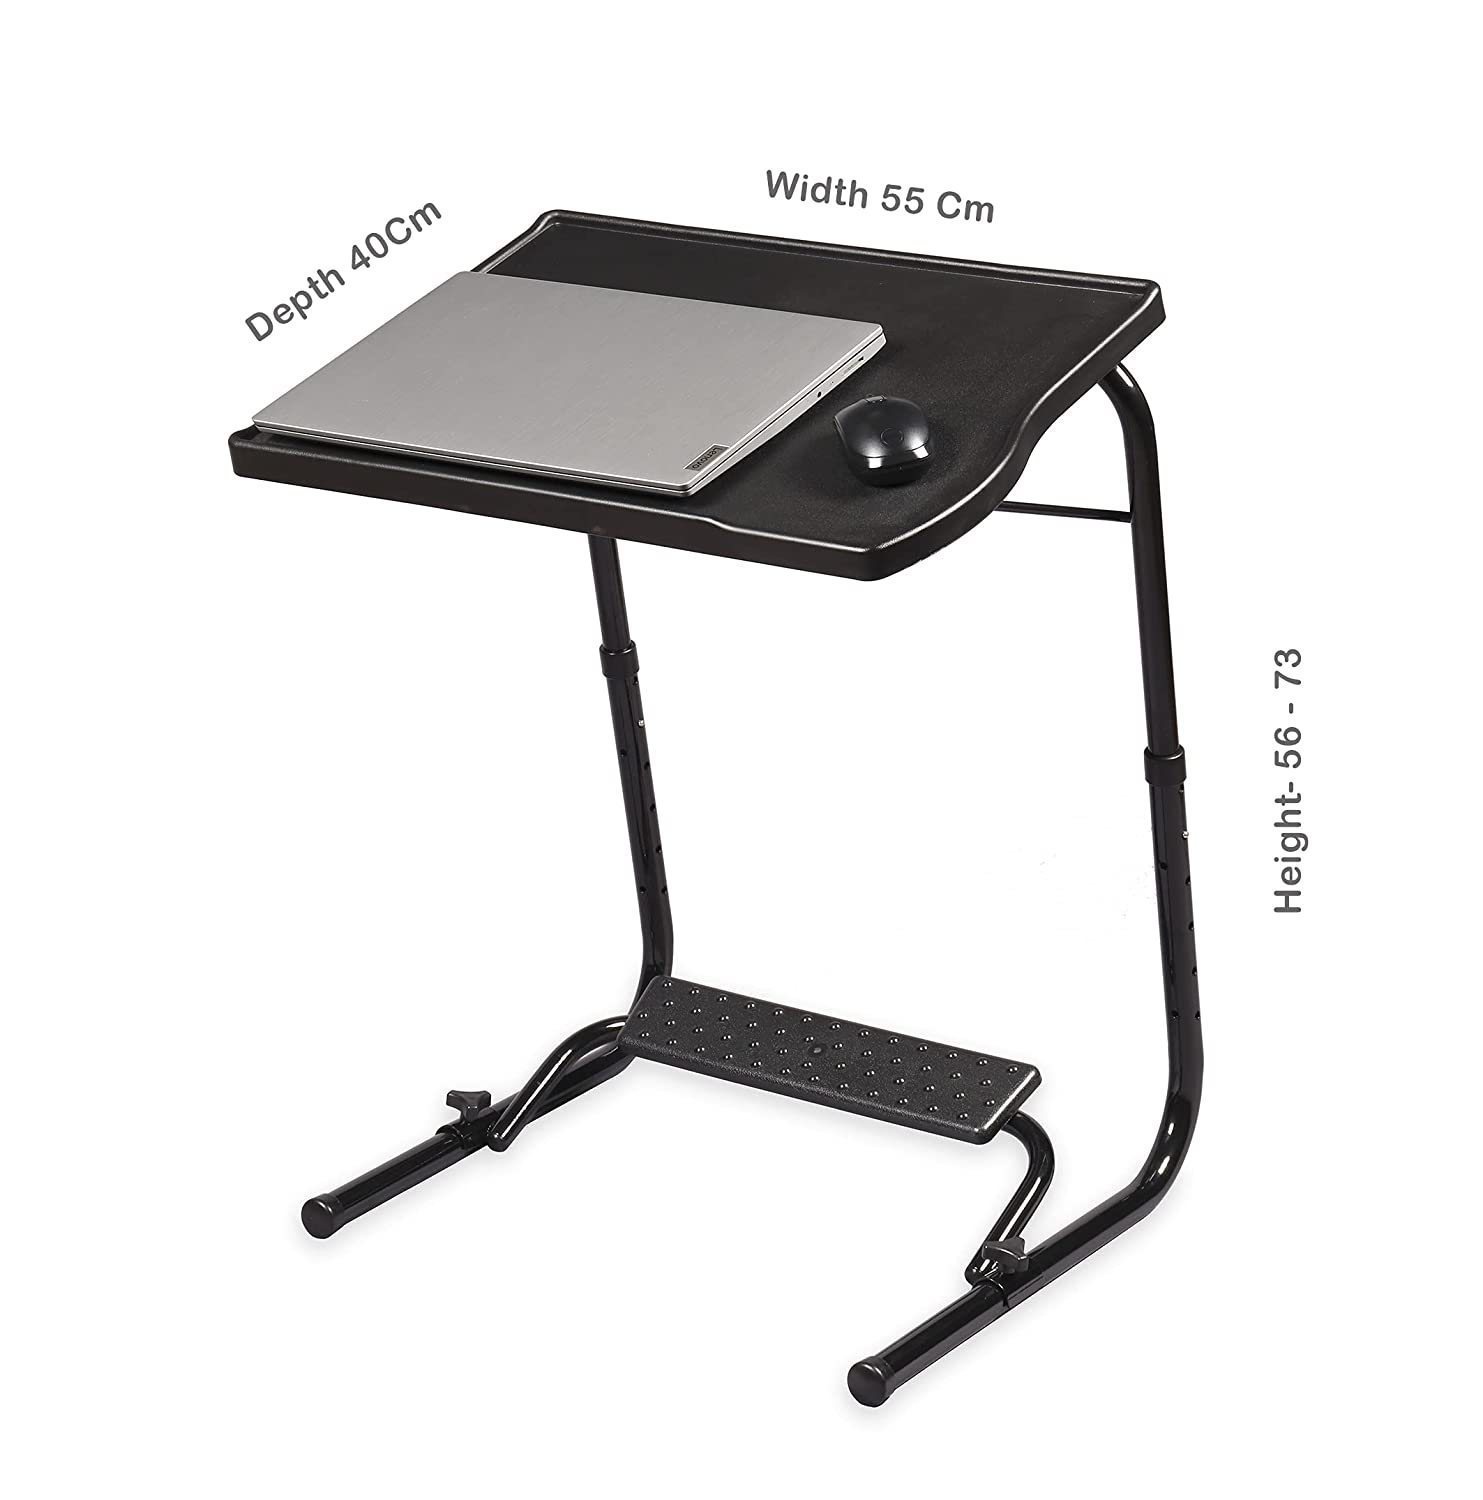 TABLE BUDDY executive ® | Folding Table With Cup Holder & Detachable Foot Rest | Black